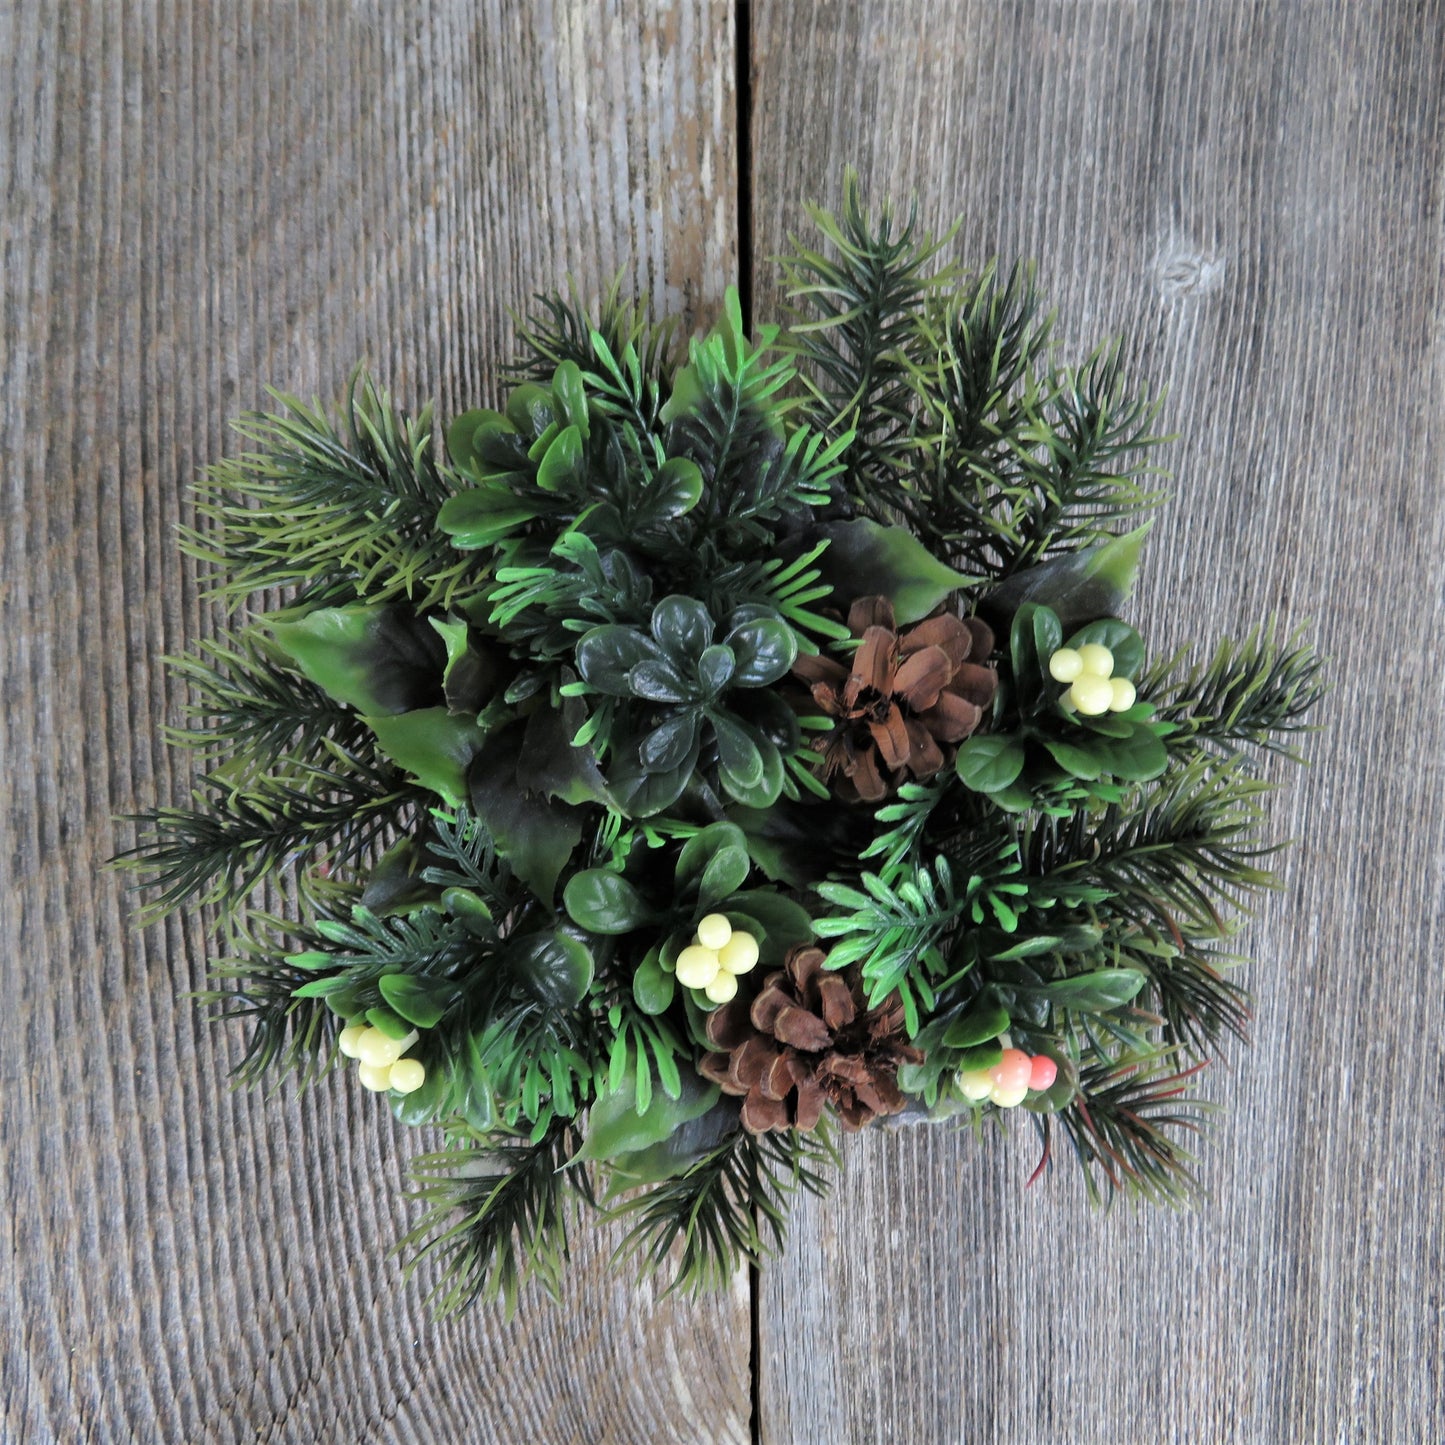 Vintage Greenery Candle Wreath Garland Christmas Plastic Holly Fir Pine Cone Berries Centerpiece